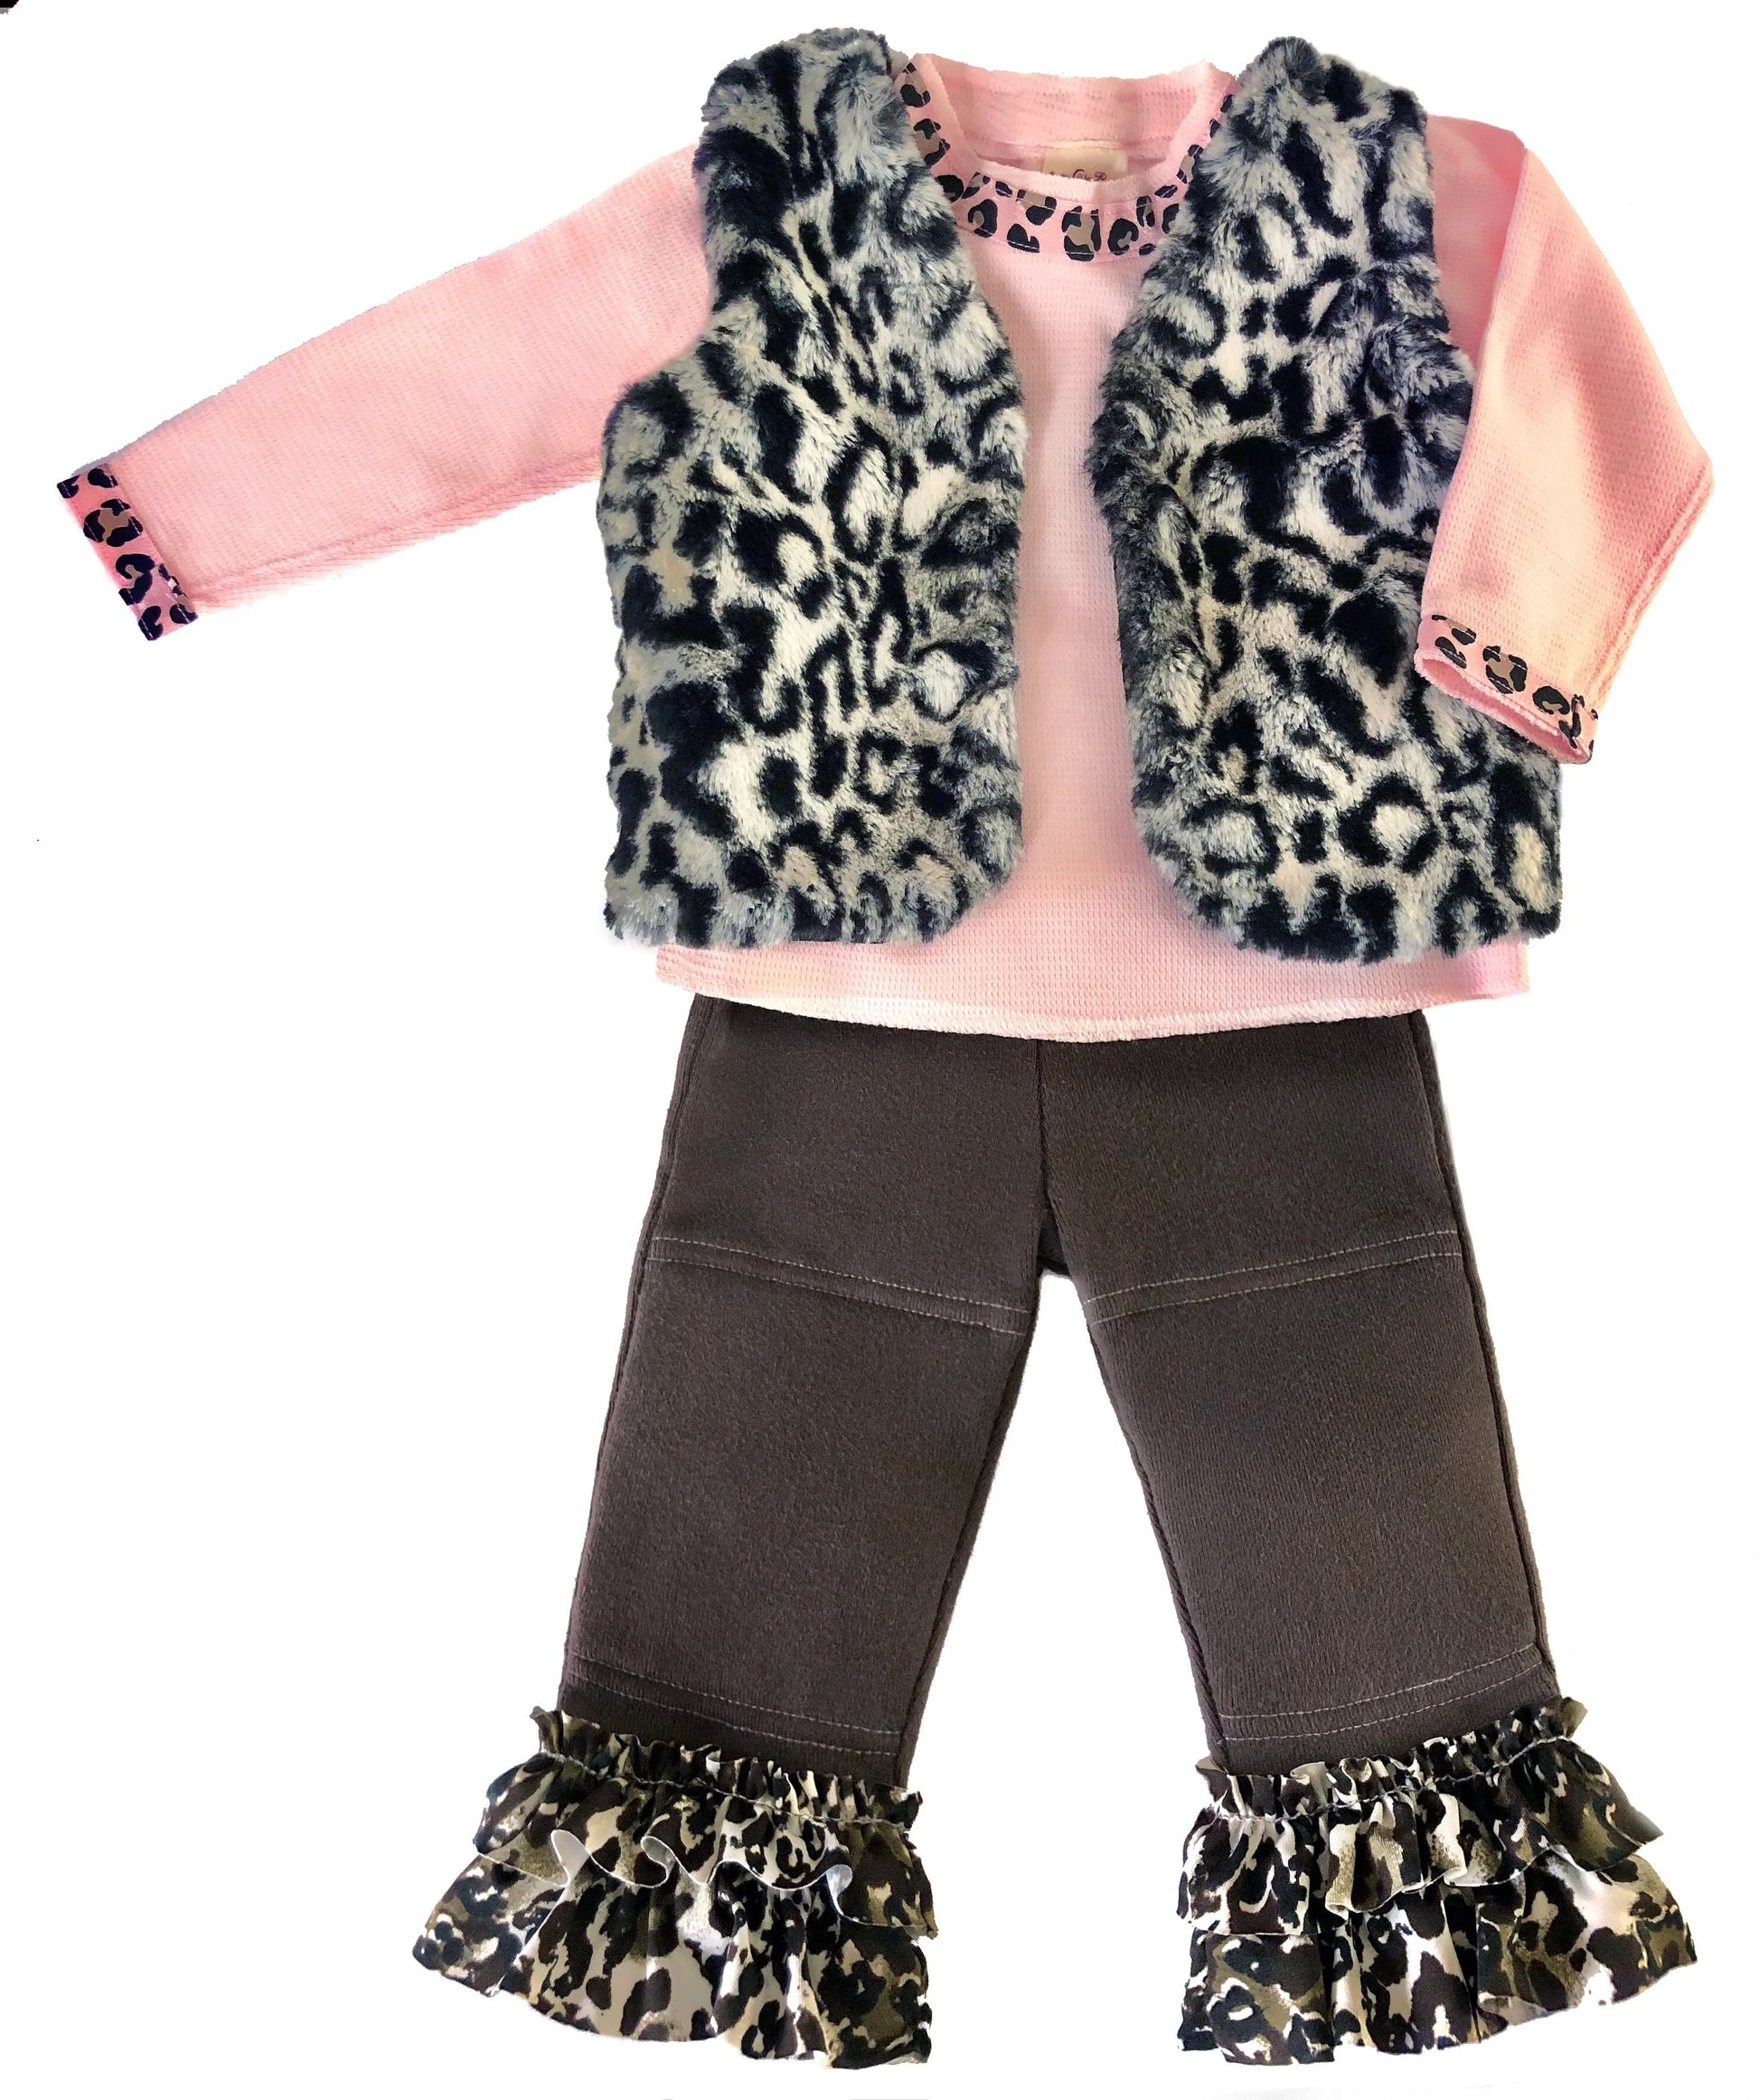 Most popular... our soft, sustainable combed cotton, rib knit legging with fully lined padded knee design. Leopard print ruffle trim in Lycra. Pair with reversible leopard cuddle vest to complete the look.